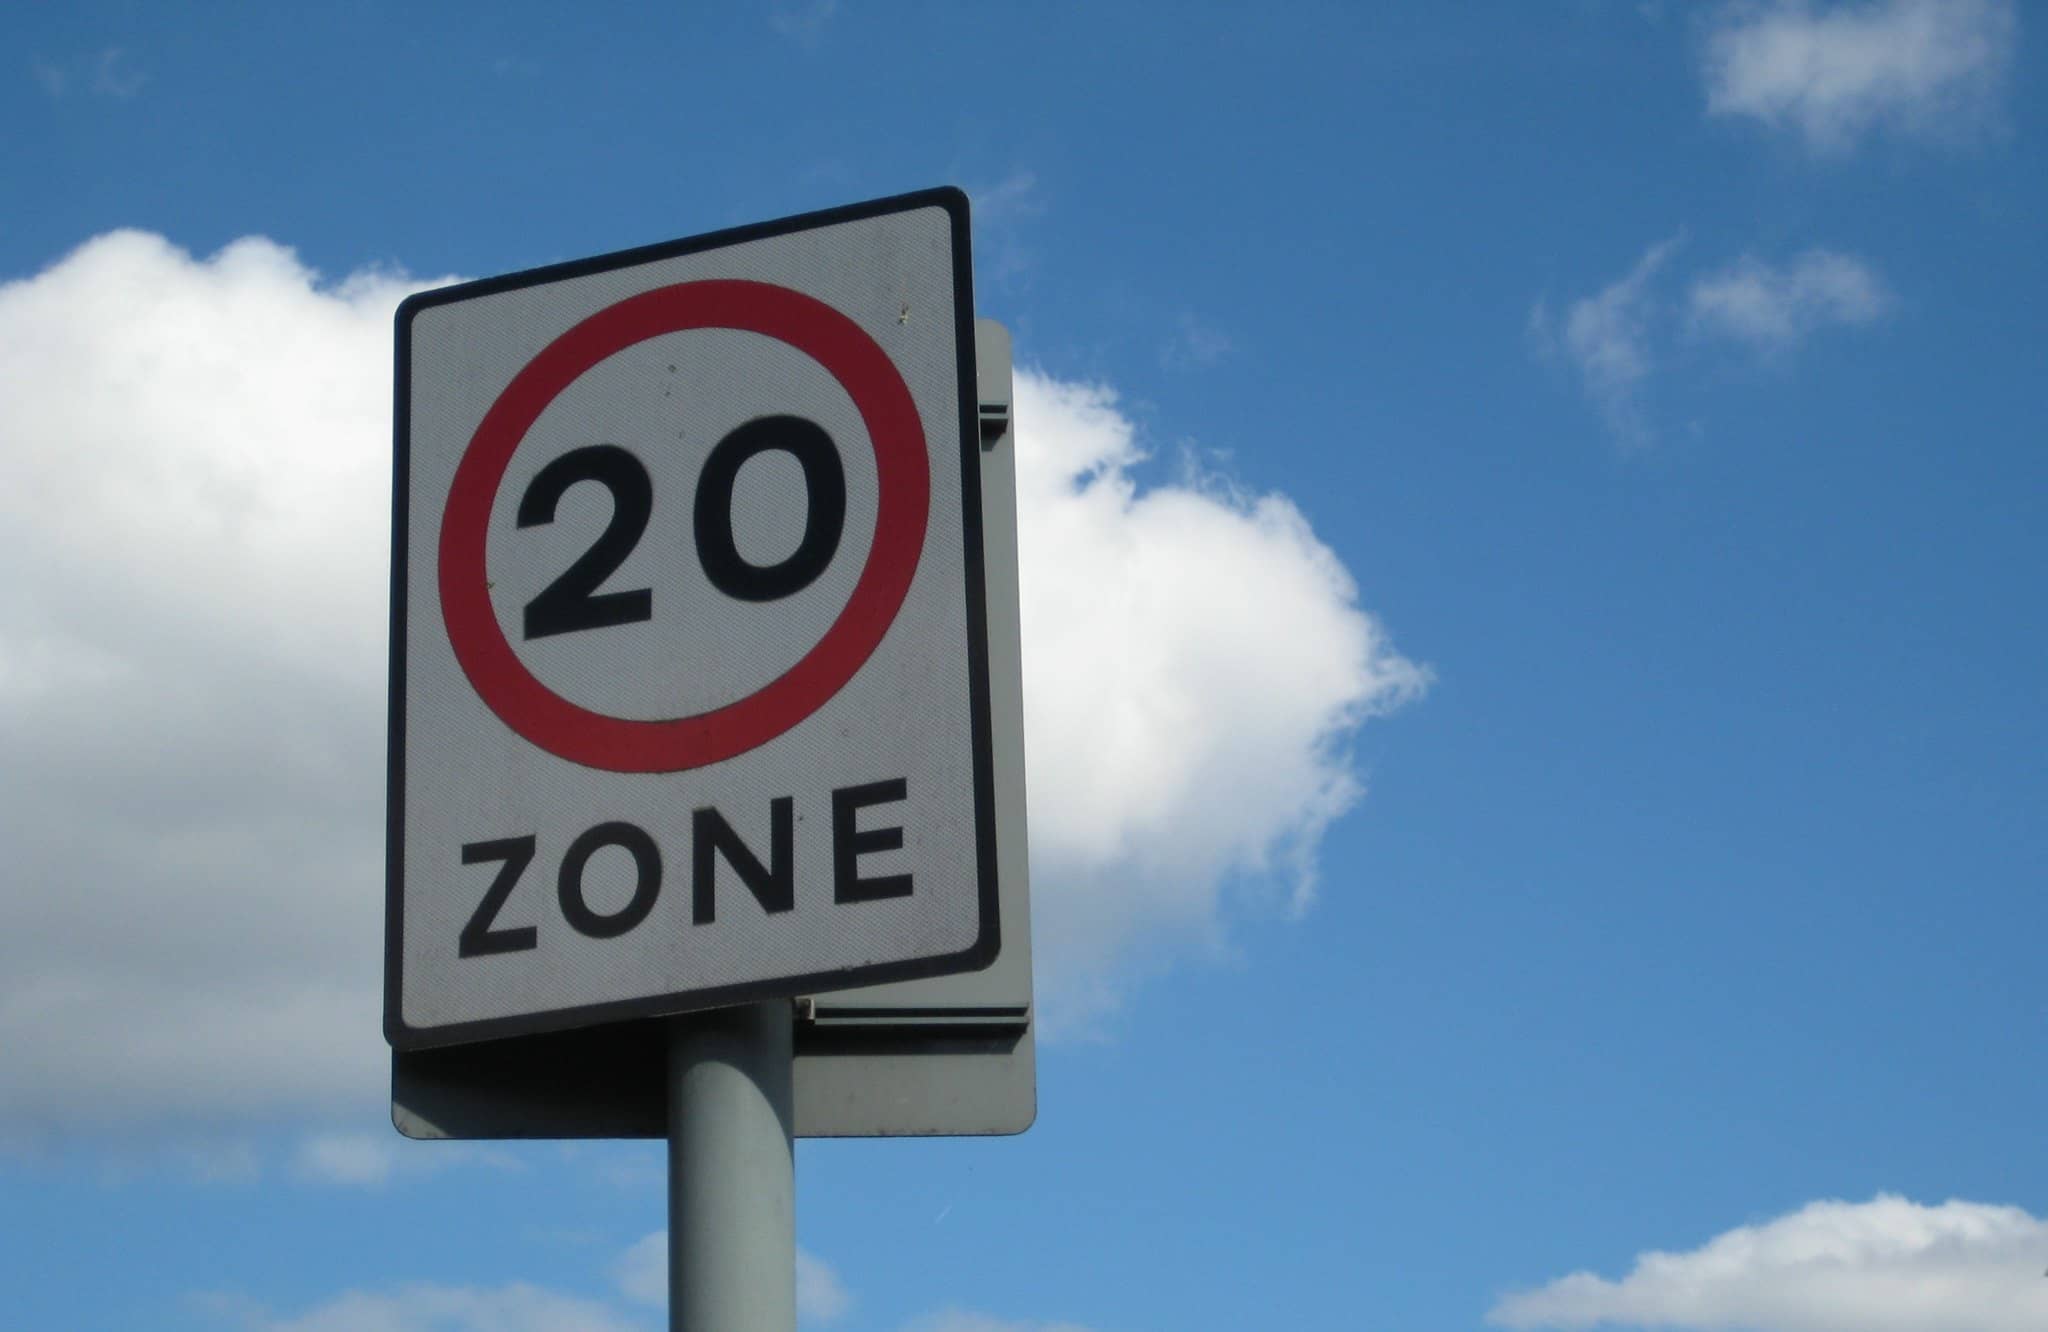 20mph zone sign with blue sky in background by edinburghgreens